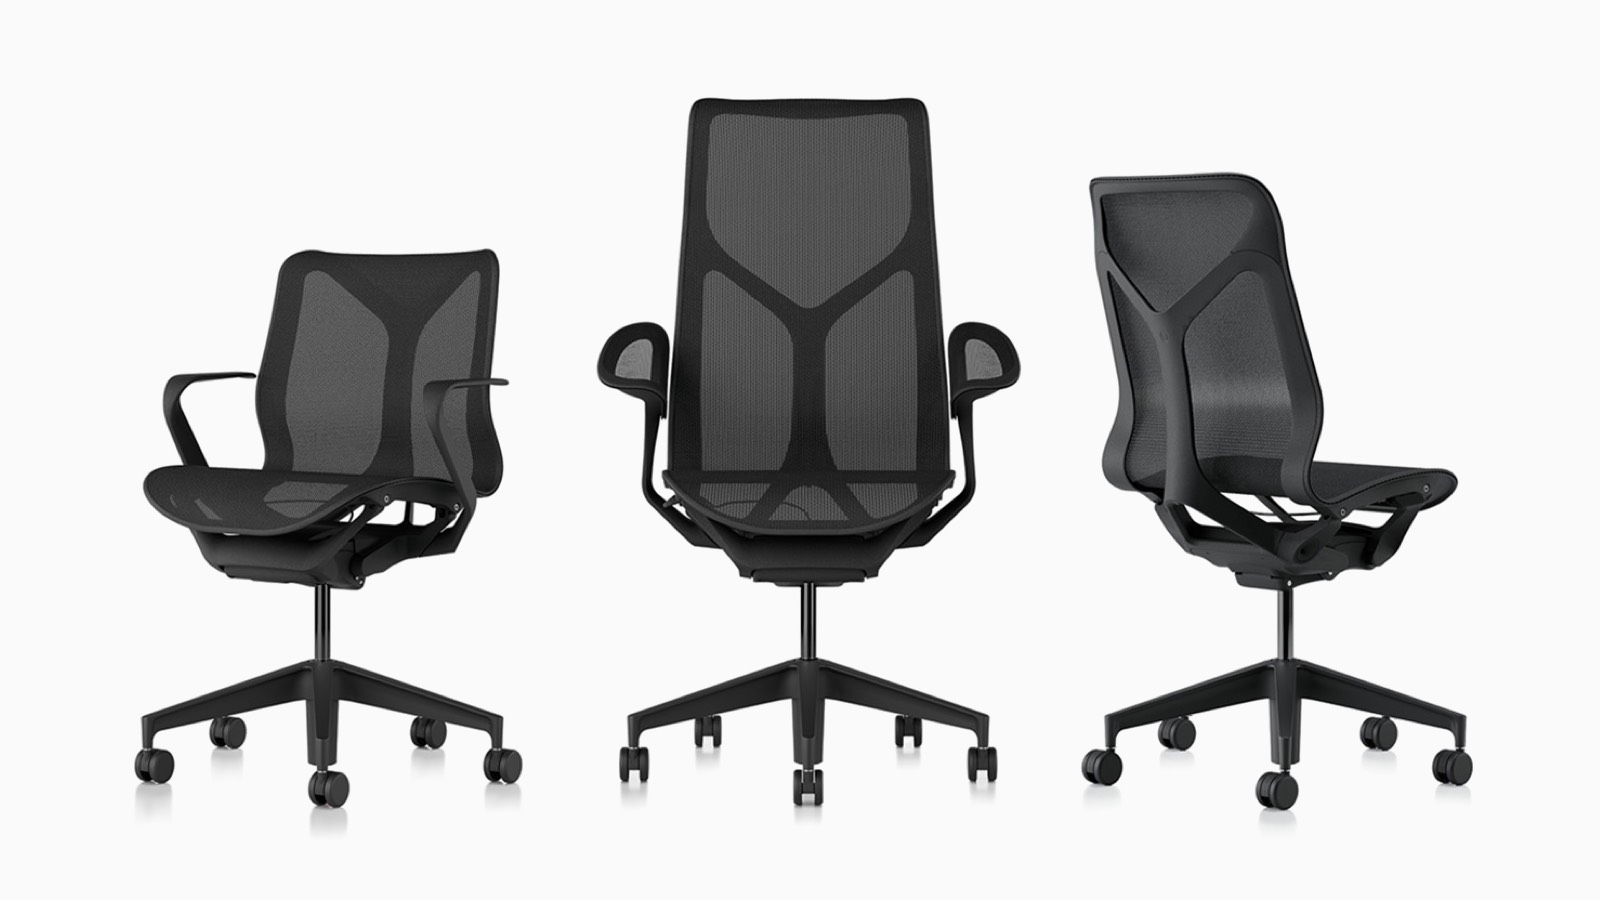 Low-back, high-back, and mid-back Cosm ergonomic desk chairs with suspension materials, bases, and frames in Graphite dark gray.